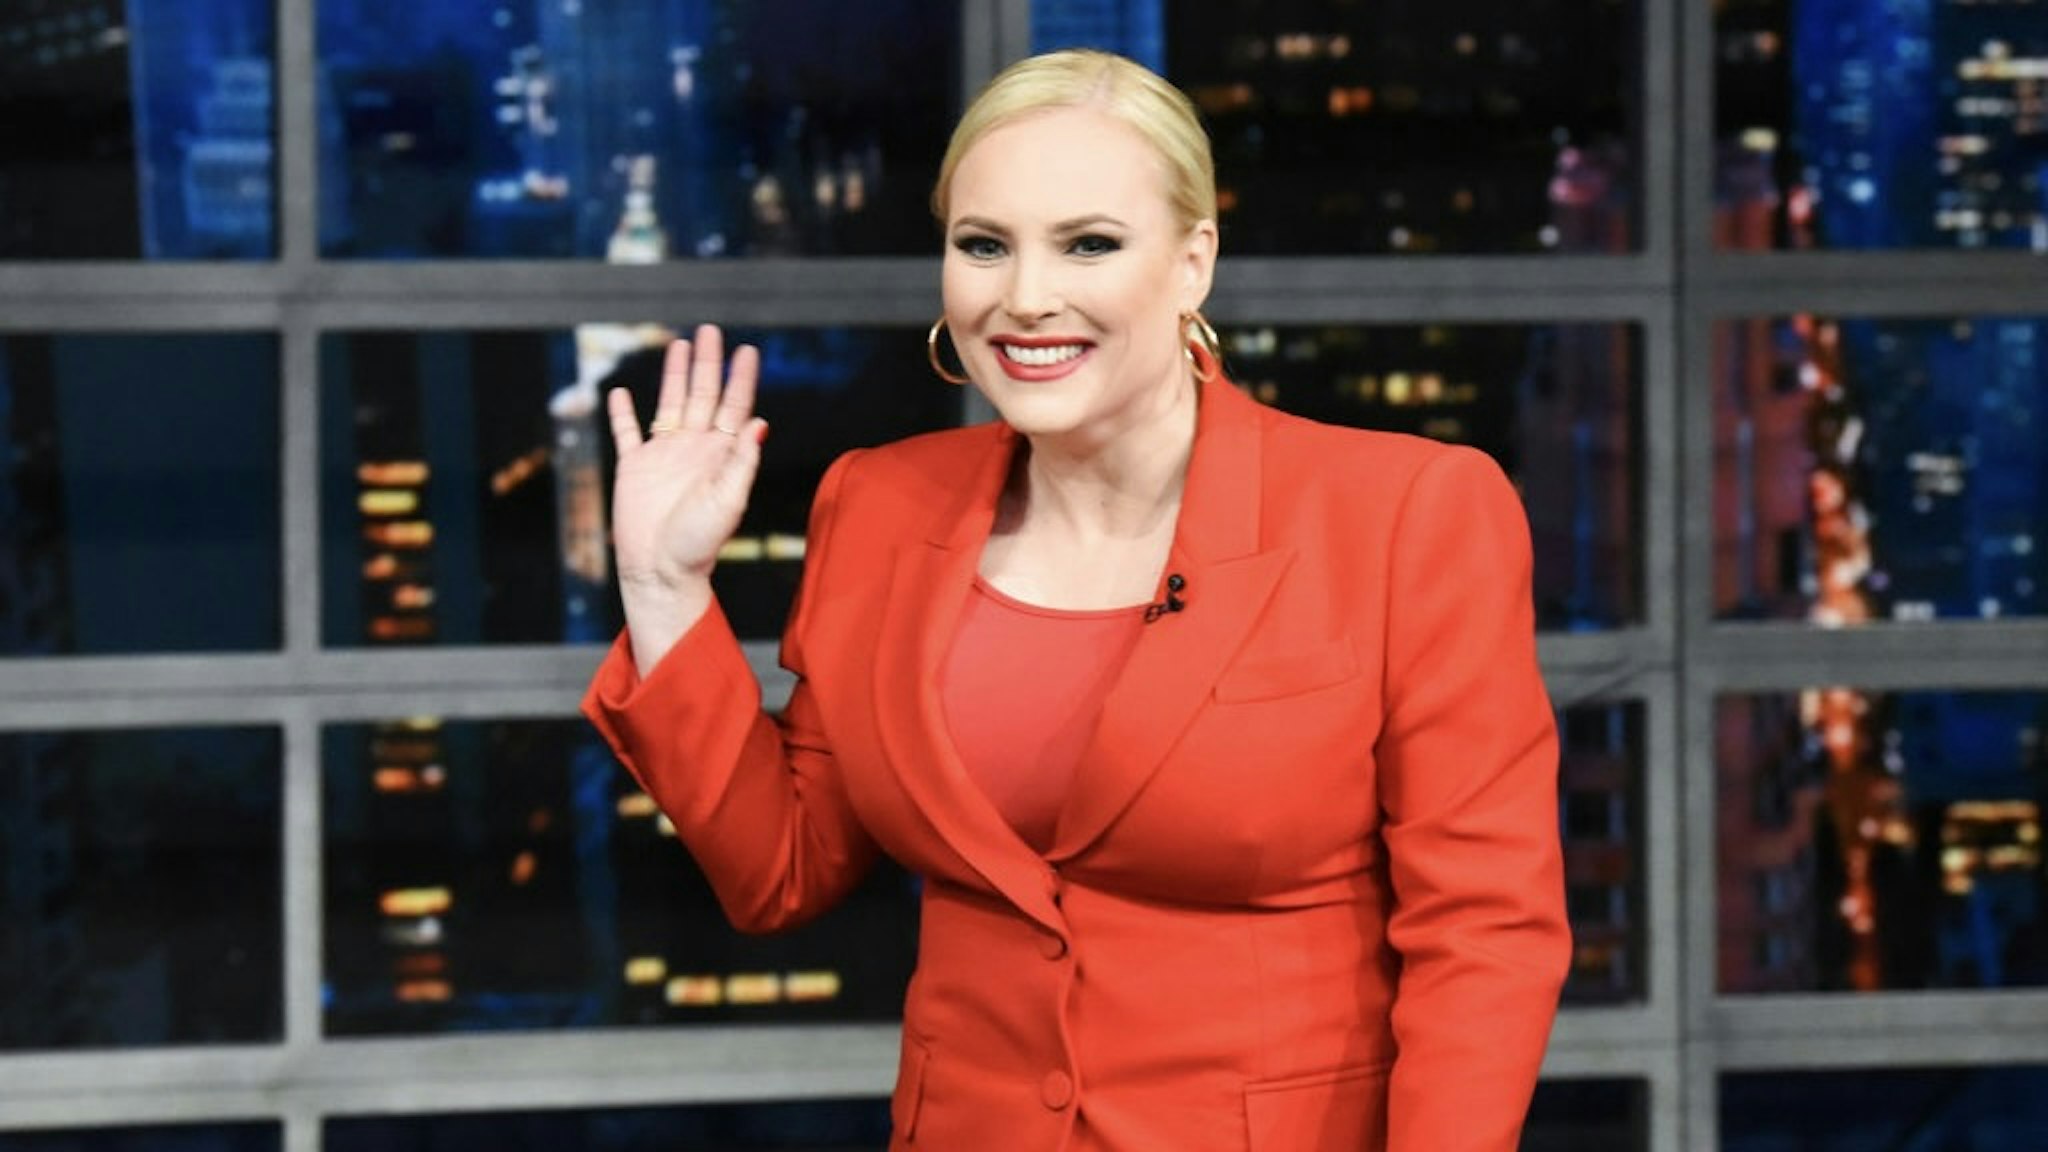 The Late Show with Stephen Colbert... NEW YORK - FEBRUARY 1: The Late Show with Stephen Colbert and guest Meghan McCain during Thursday's February 1, 2018 show. (Photo by Scott Kowalchyk/CBS via Getty Images) CBS Photo Archive / Contributor via Getty Images